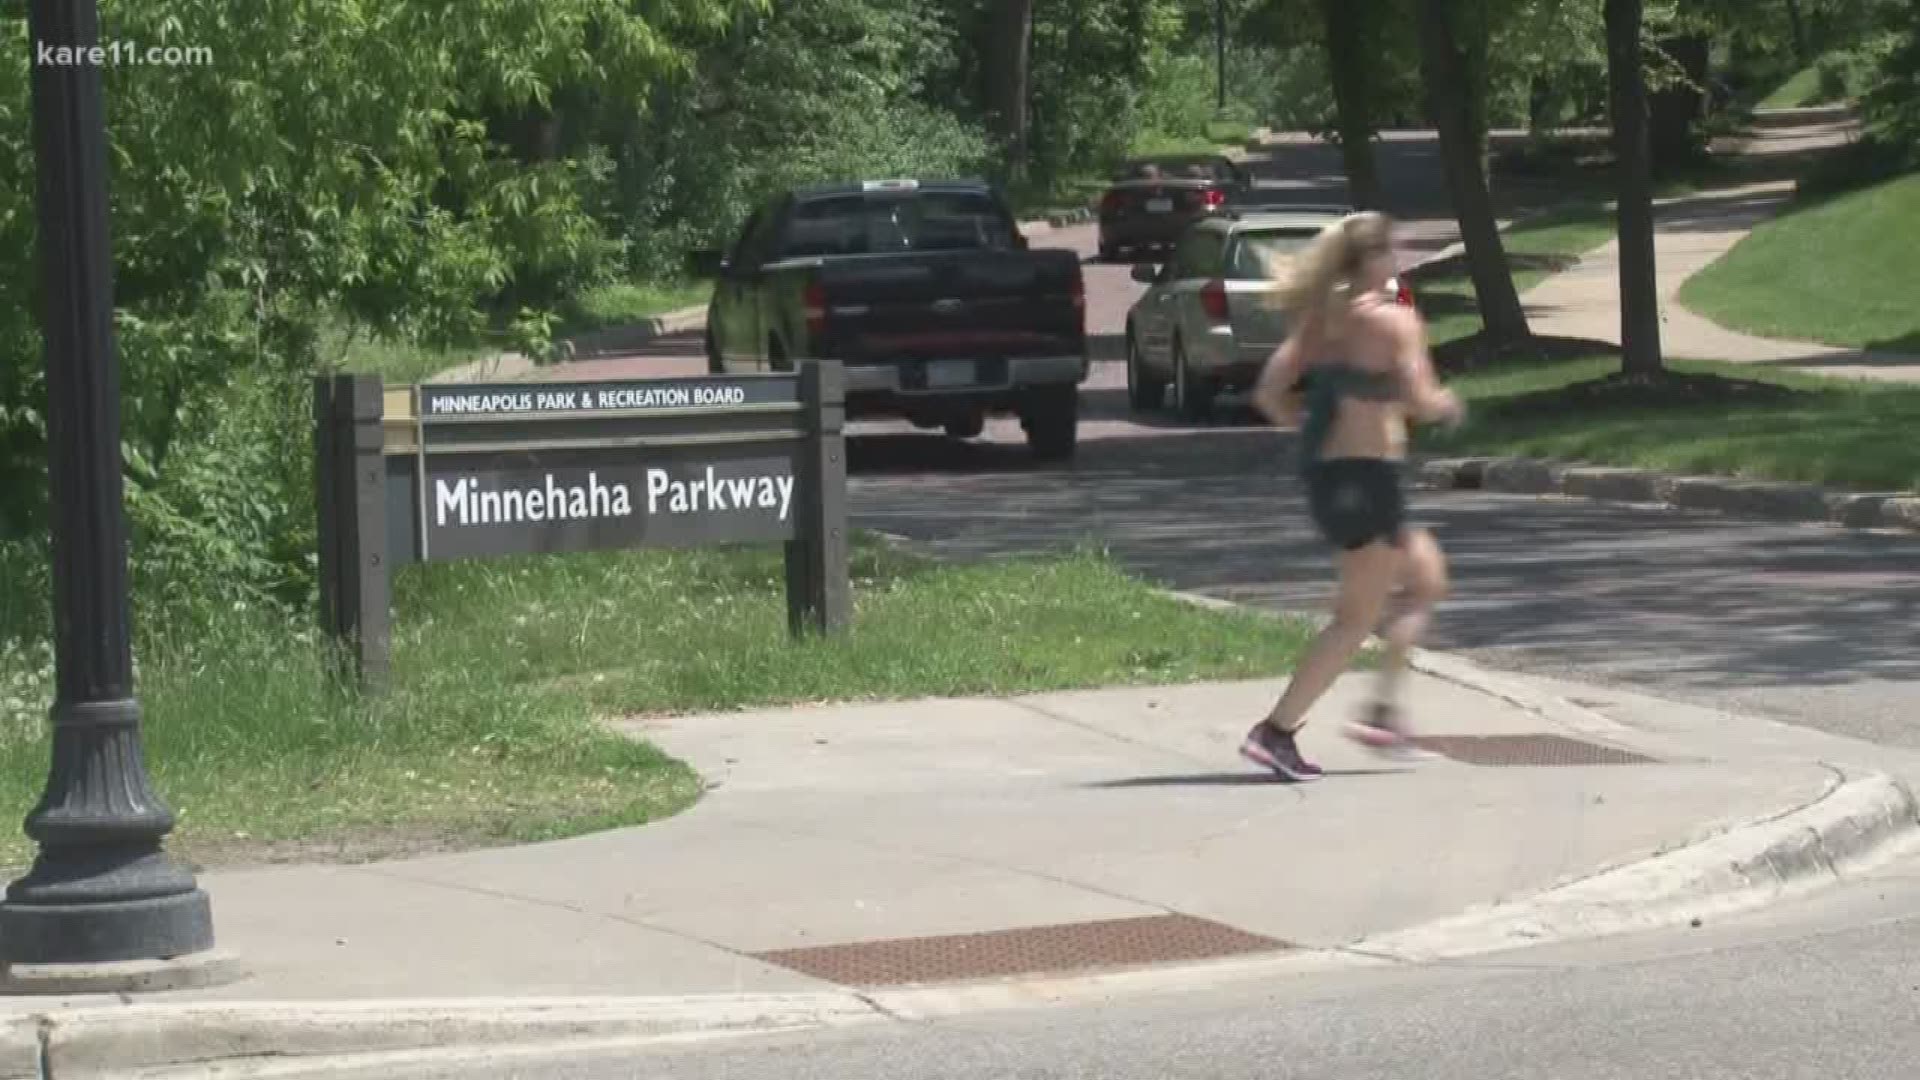 The Minneapolis Parks Board is considering closing parts of Minnehaha Parkway to thru traffic, as a way of making the park along the creek safer for visitors.
Local  residents are divided on the idea..